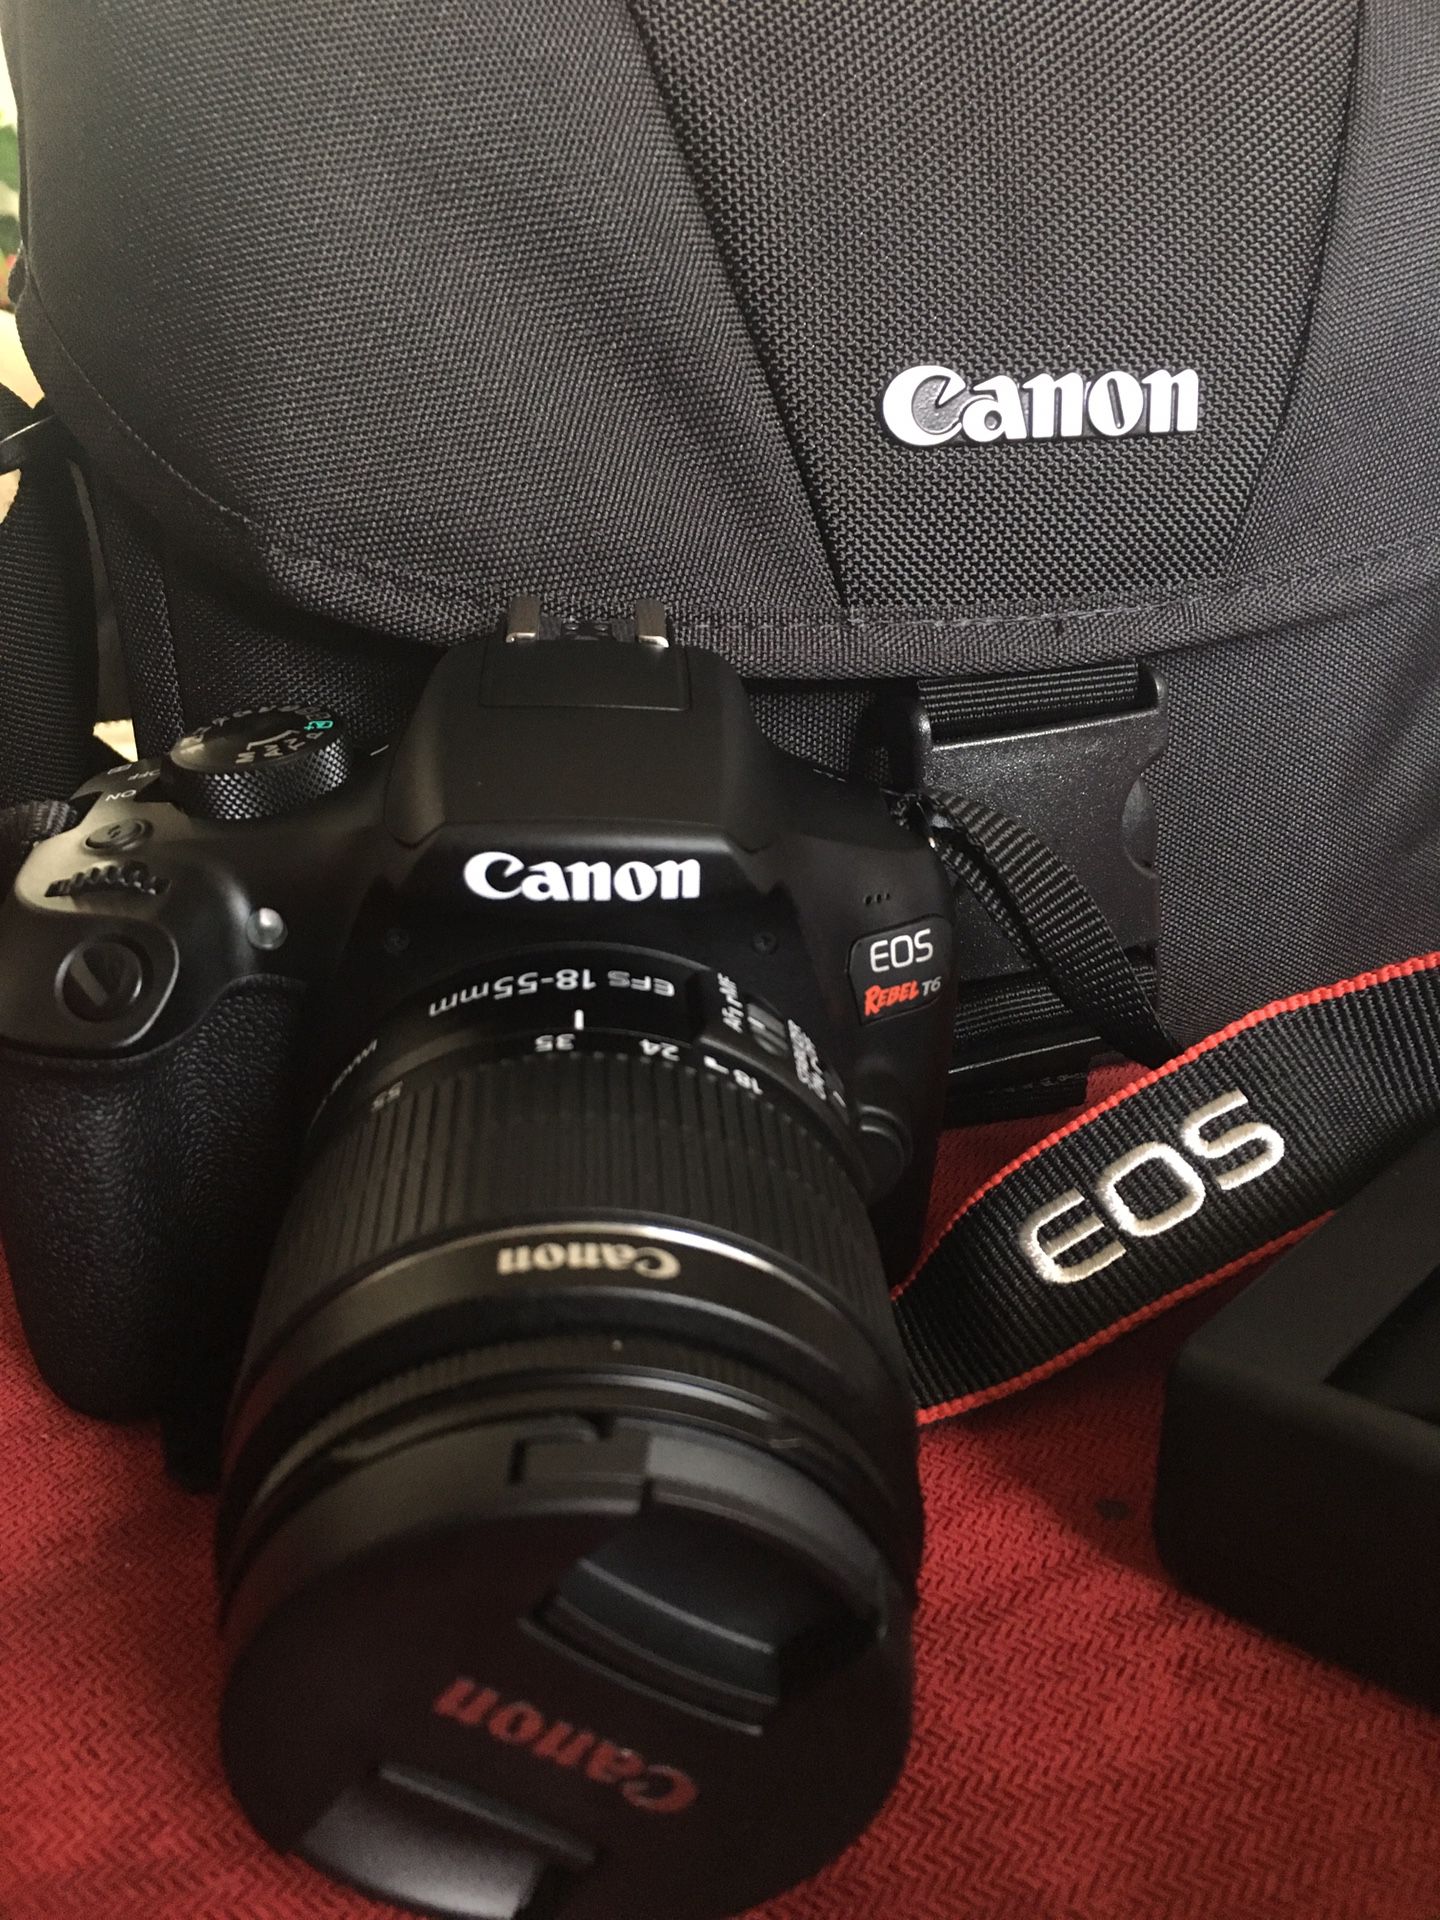 Canon Eos Rebel T6 (1300D) Camera With 2 lenses